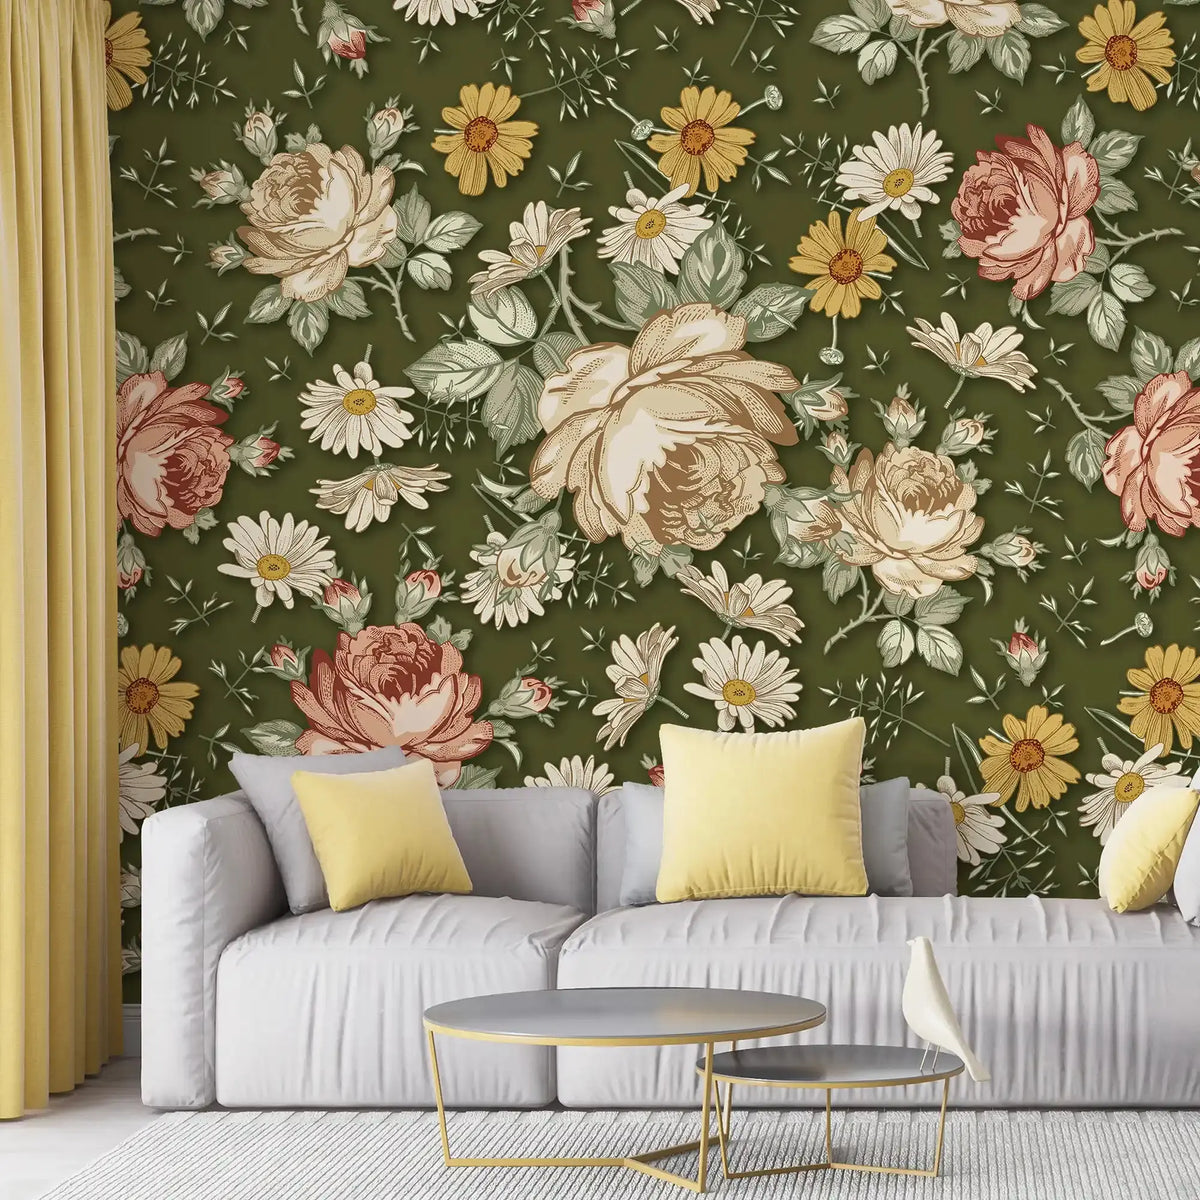 3097-C / Removable Wallpaper Peel and Stick, Floral & Geometric Pattern Wallpaper with Daisies for Room Decor - Artevella